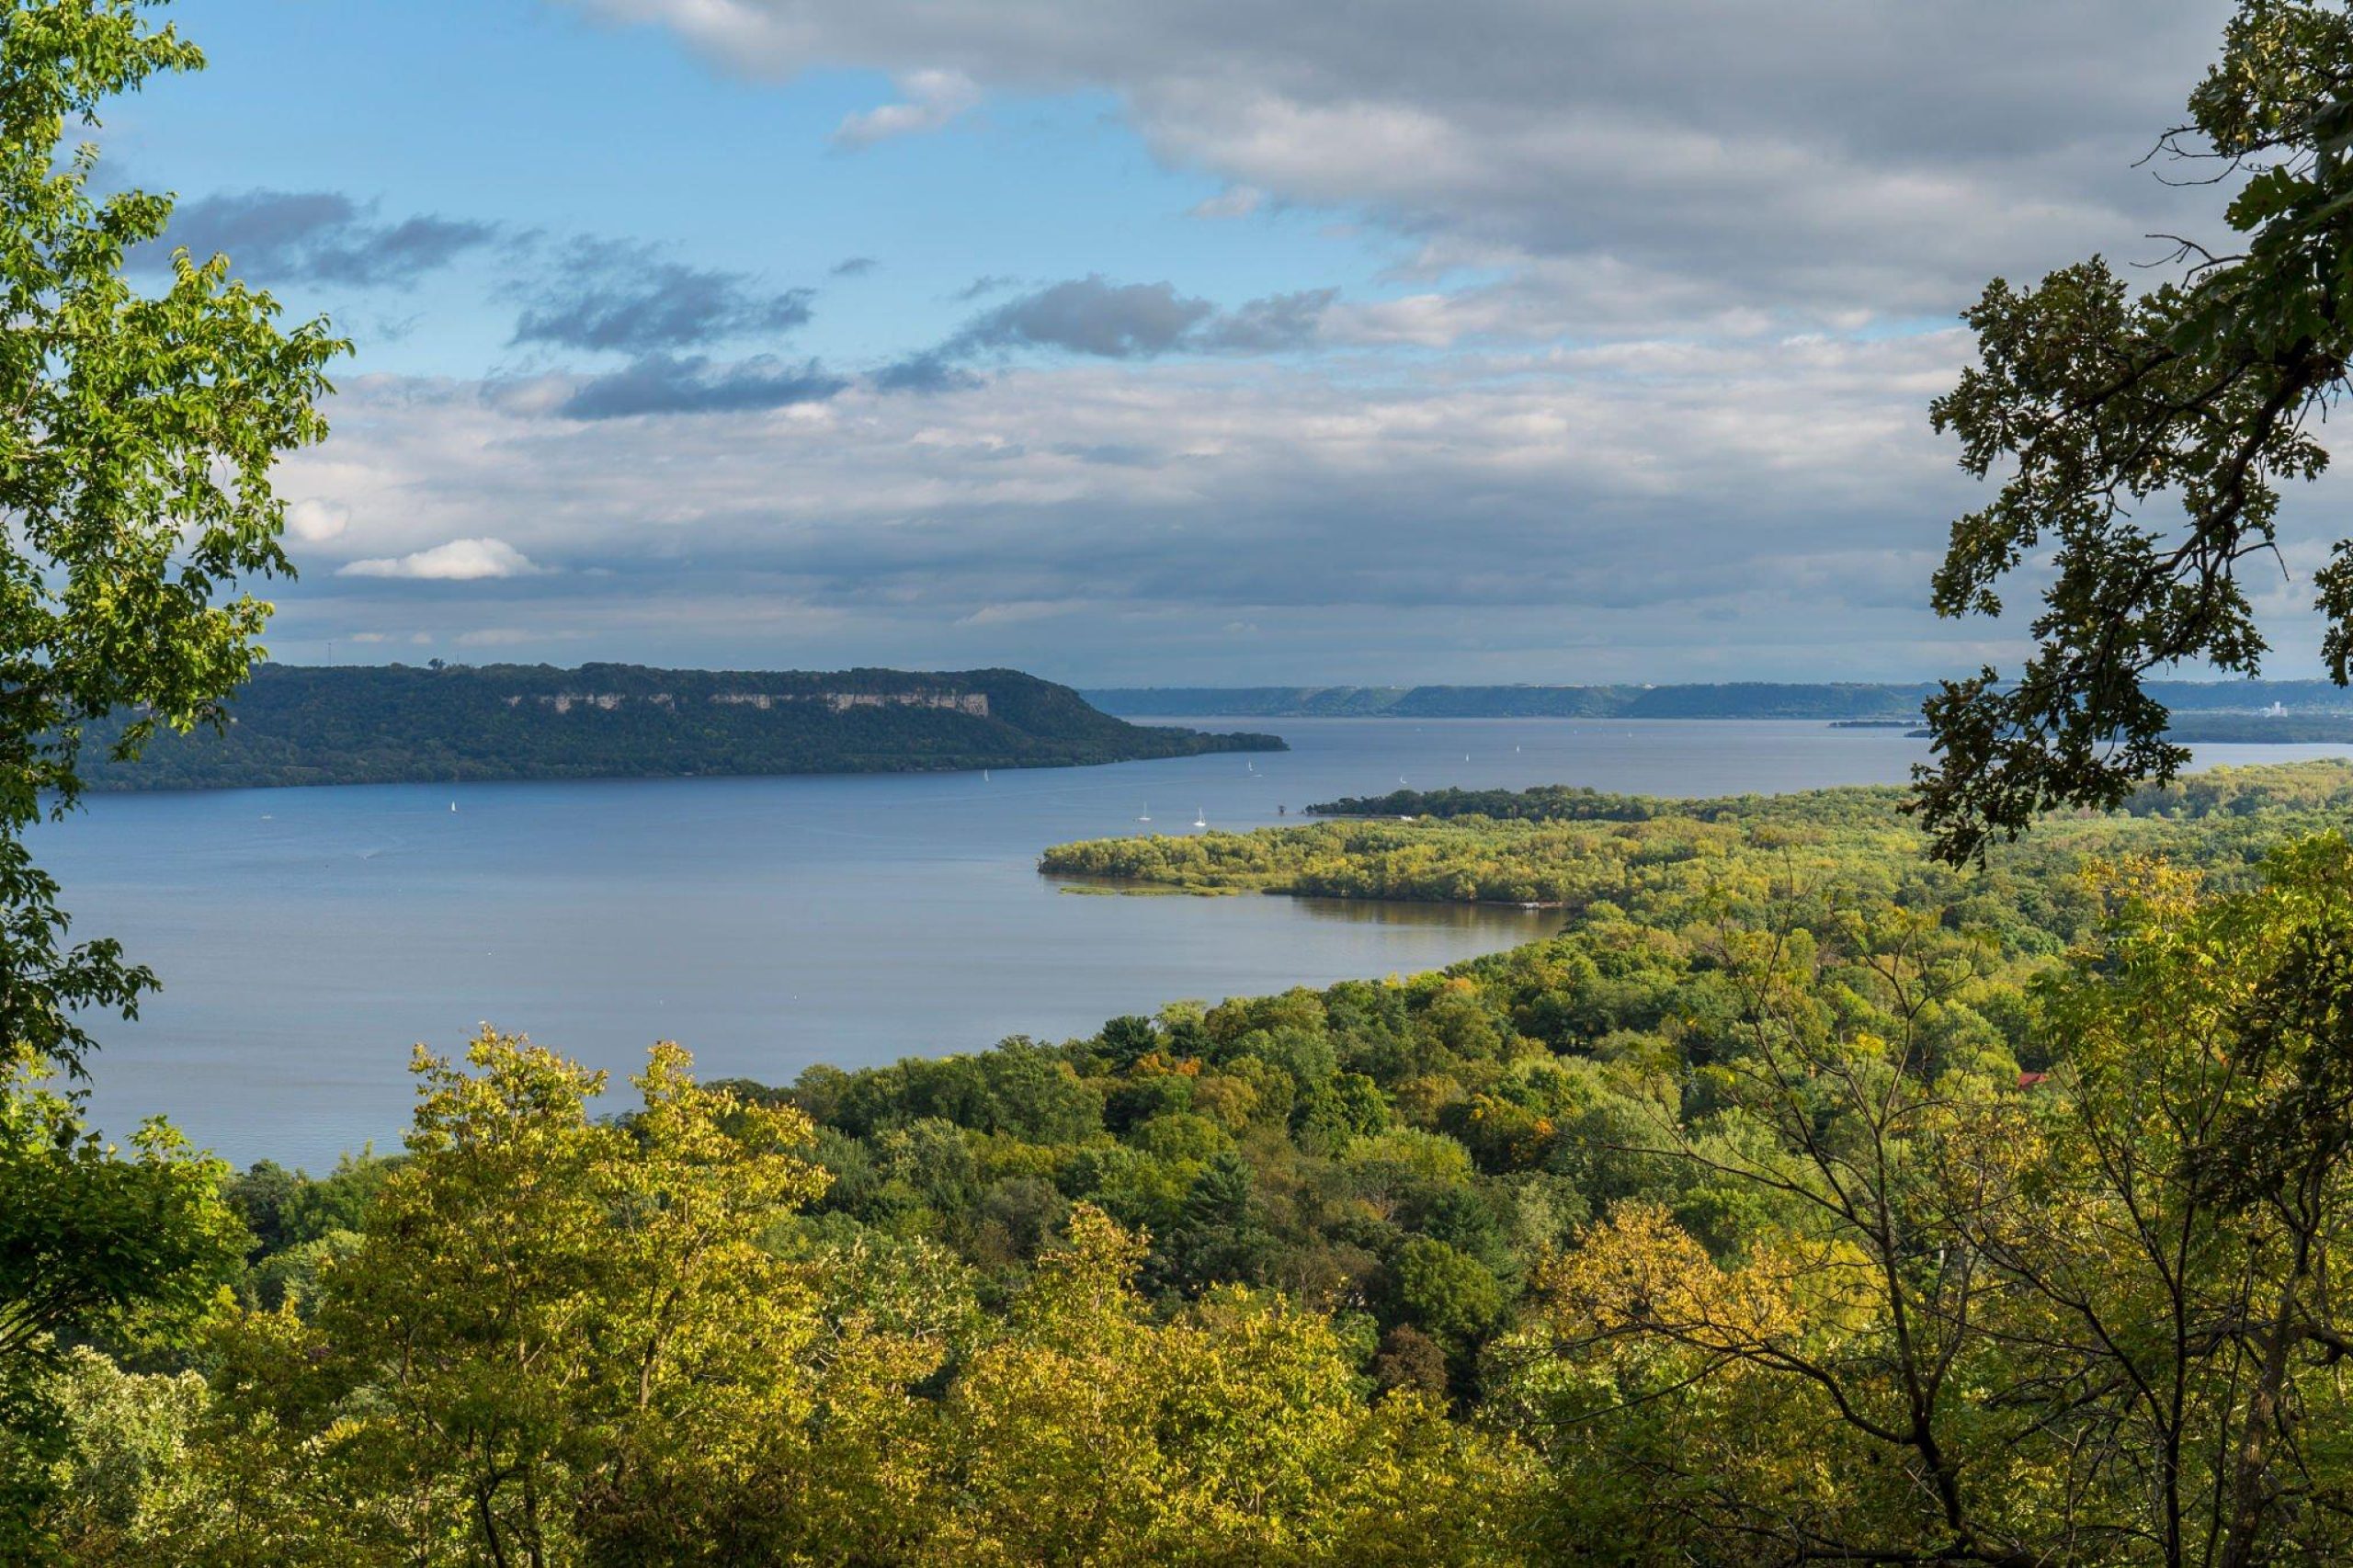 What Is Lake Pepin Famous For